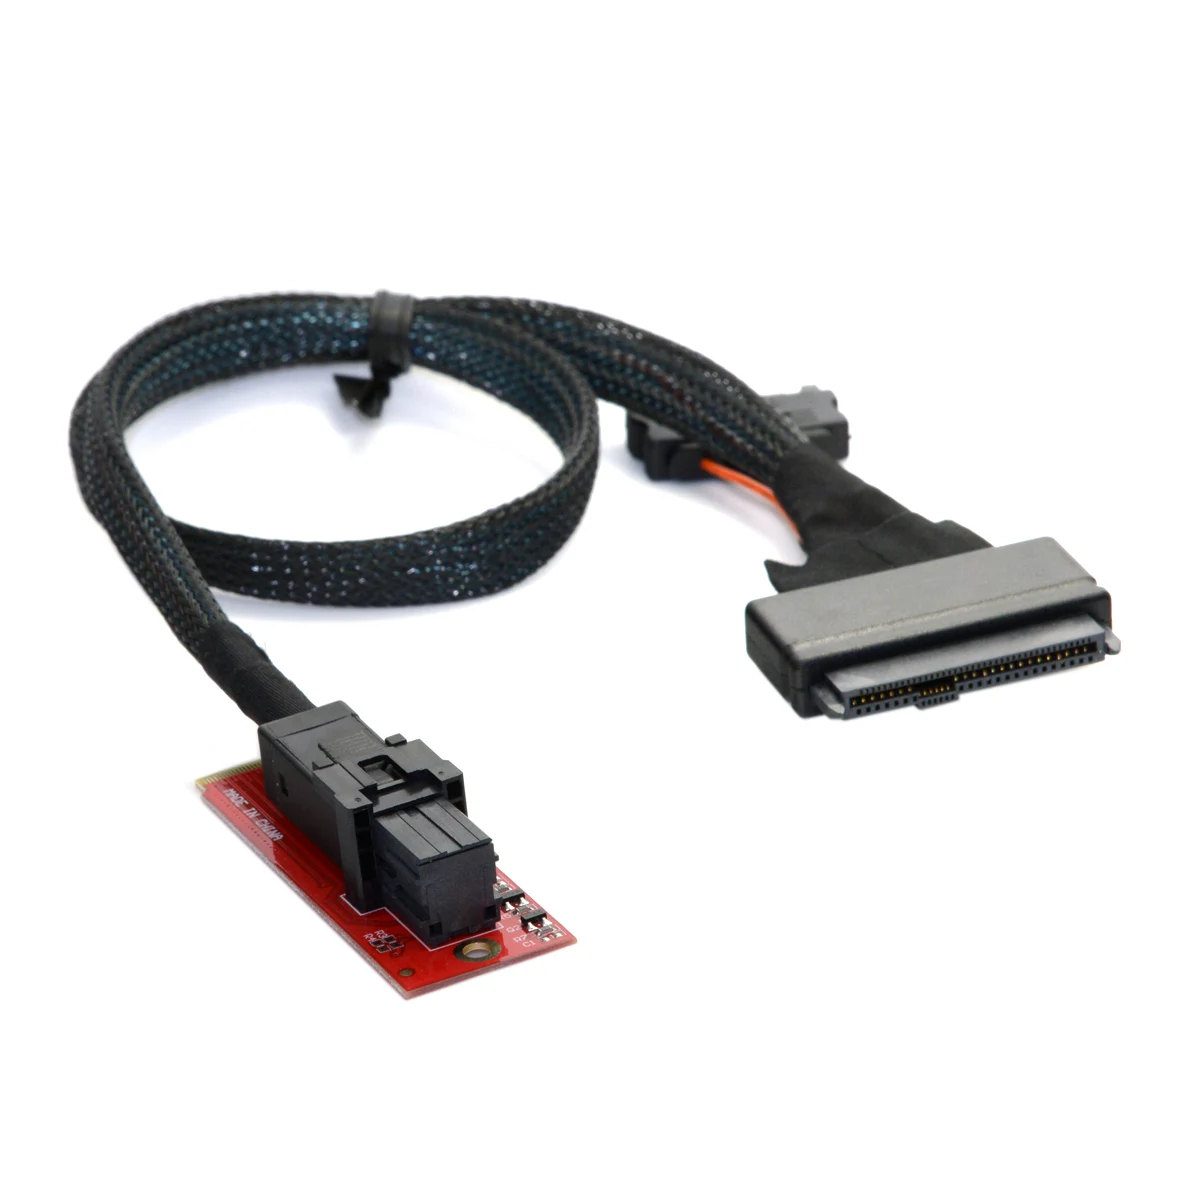 Cy U.2 U2 Kit Sff-8639 Nvme Pcie Ssd Adapter & Cable For Mainboard Intel  Ssd 750 M.2 Sff-8643 Mini Sas Hd - Pc Hardware Cables & Adapters -  AliExpress